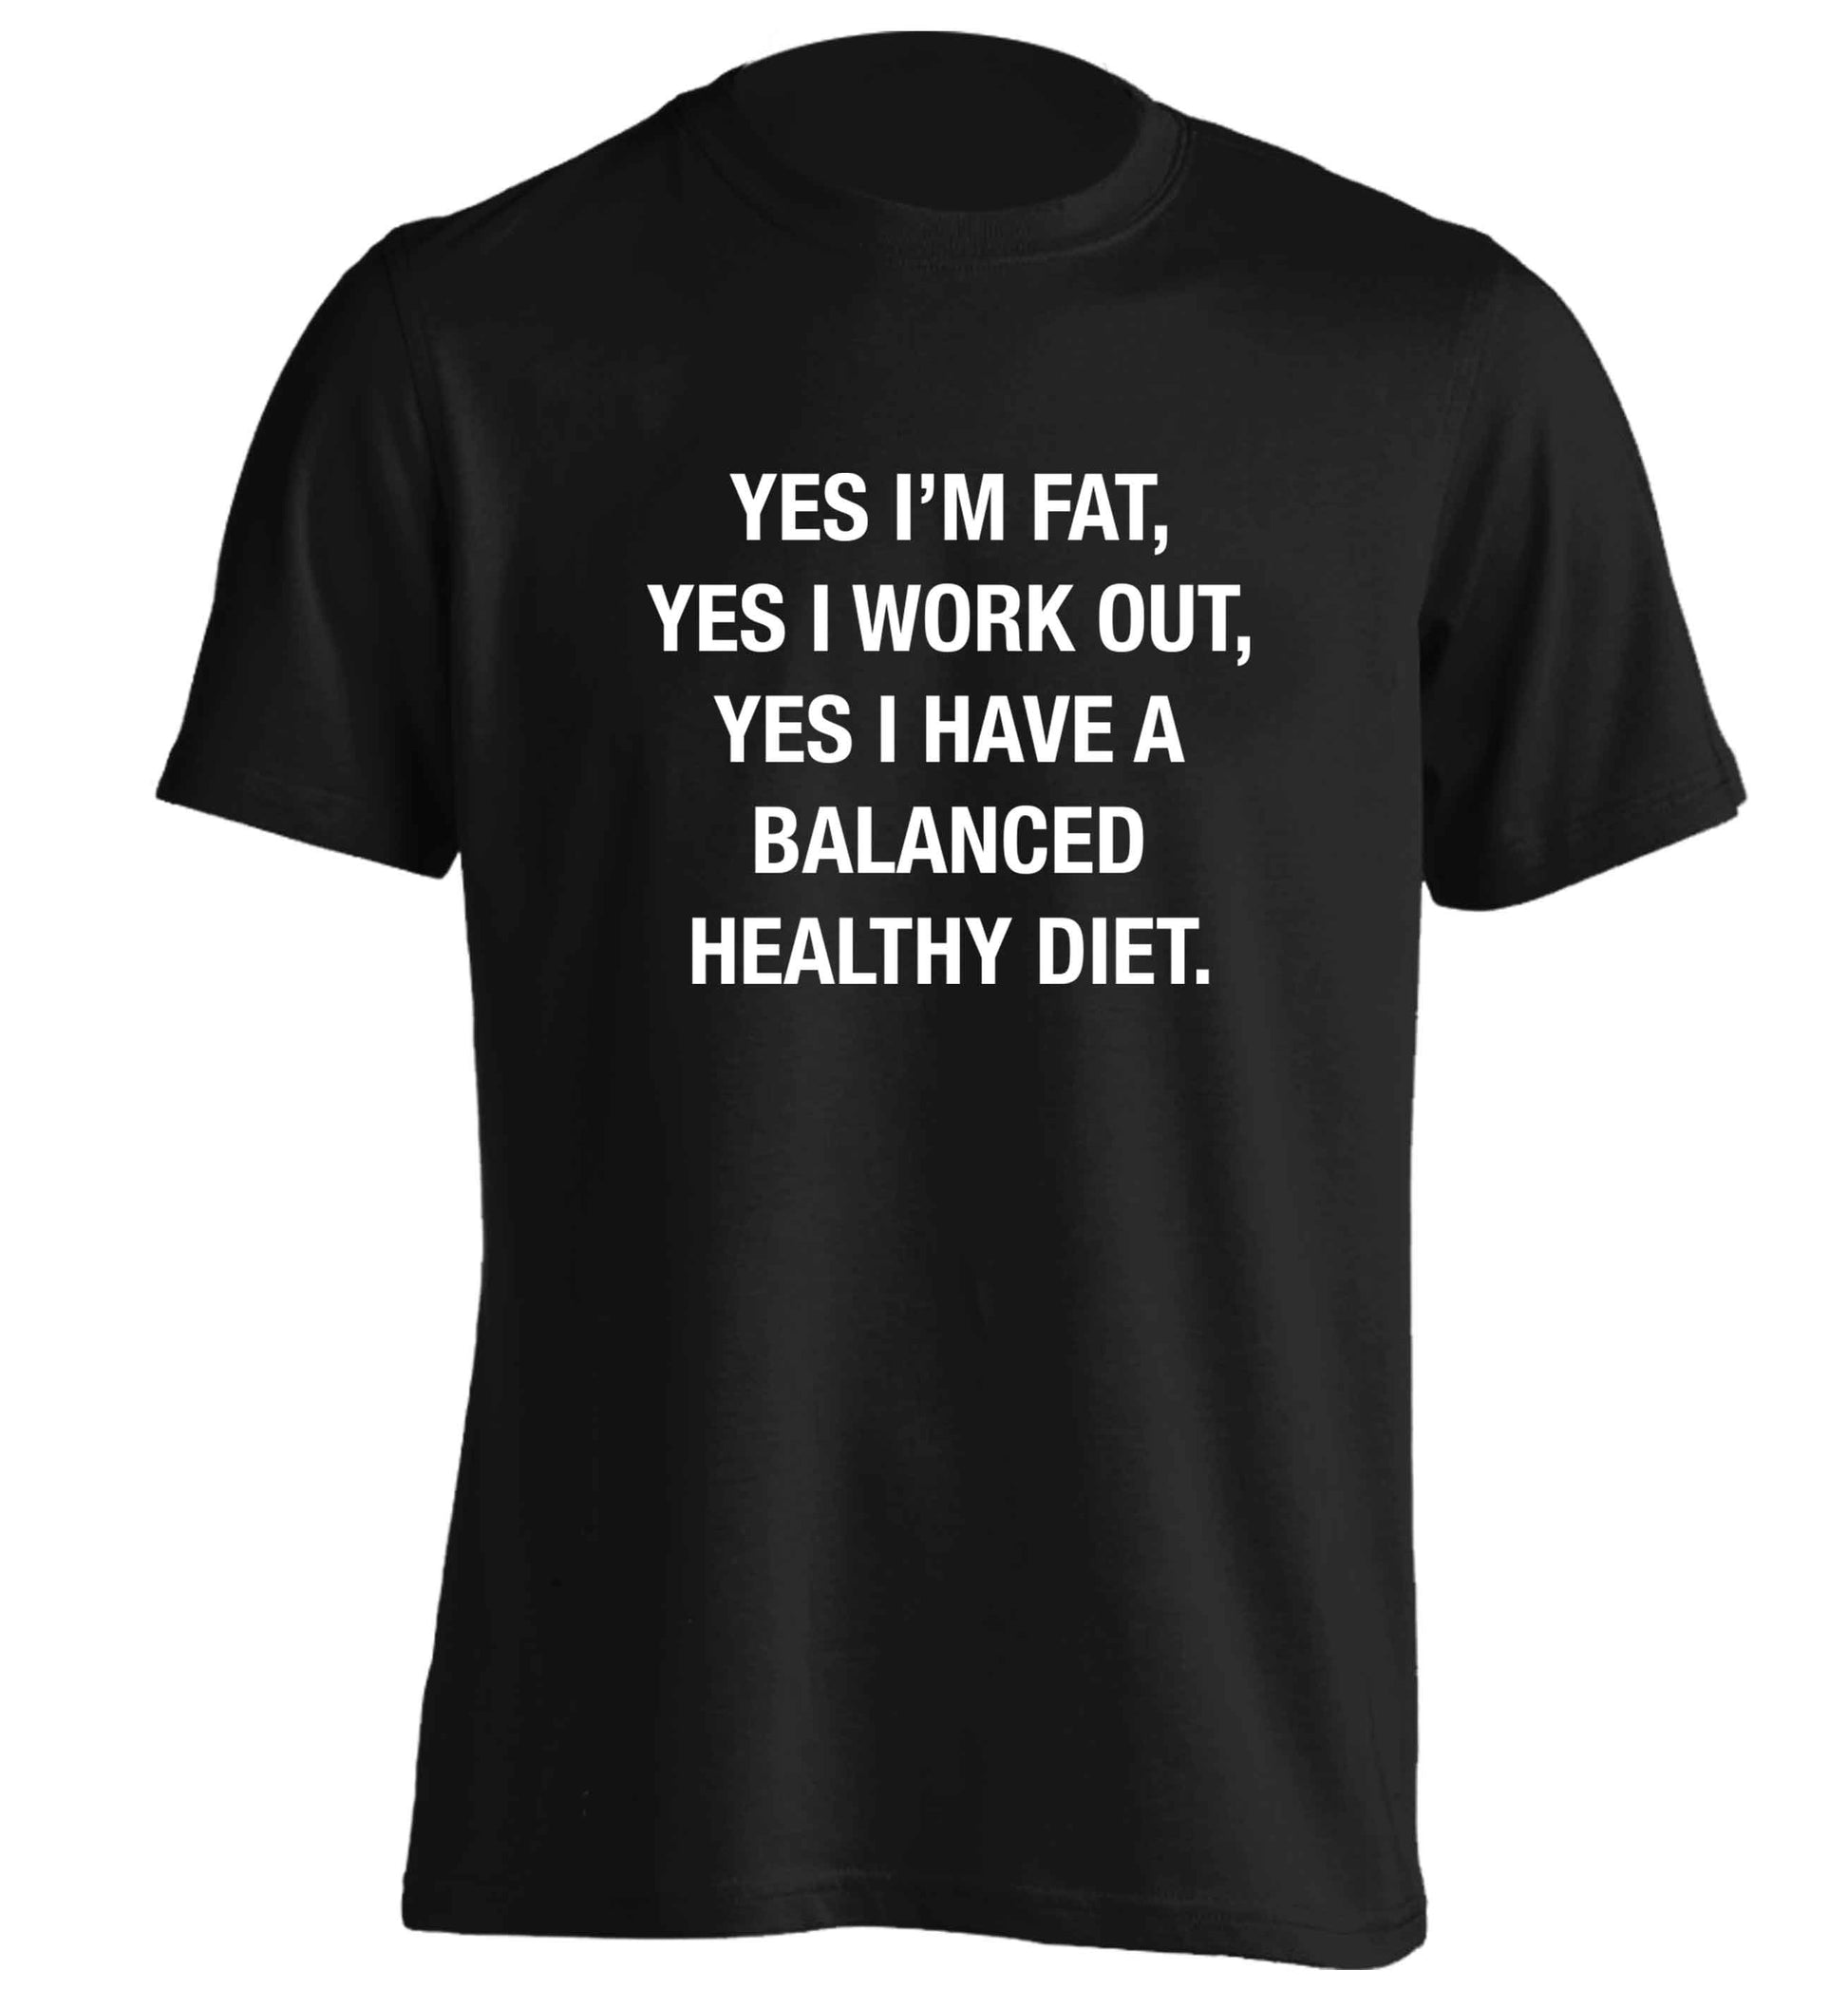 Yes I'm fat, yes I work out, yes I have a balanced healthy diet adults unisex black Tshirt 2XL